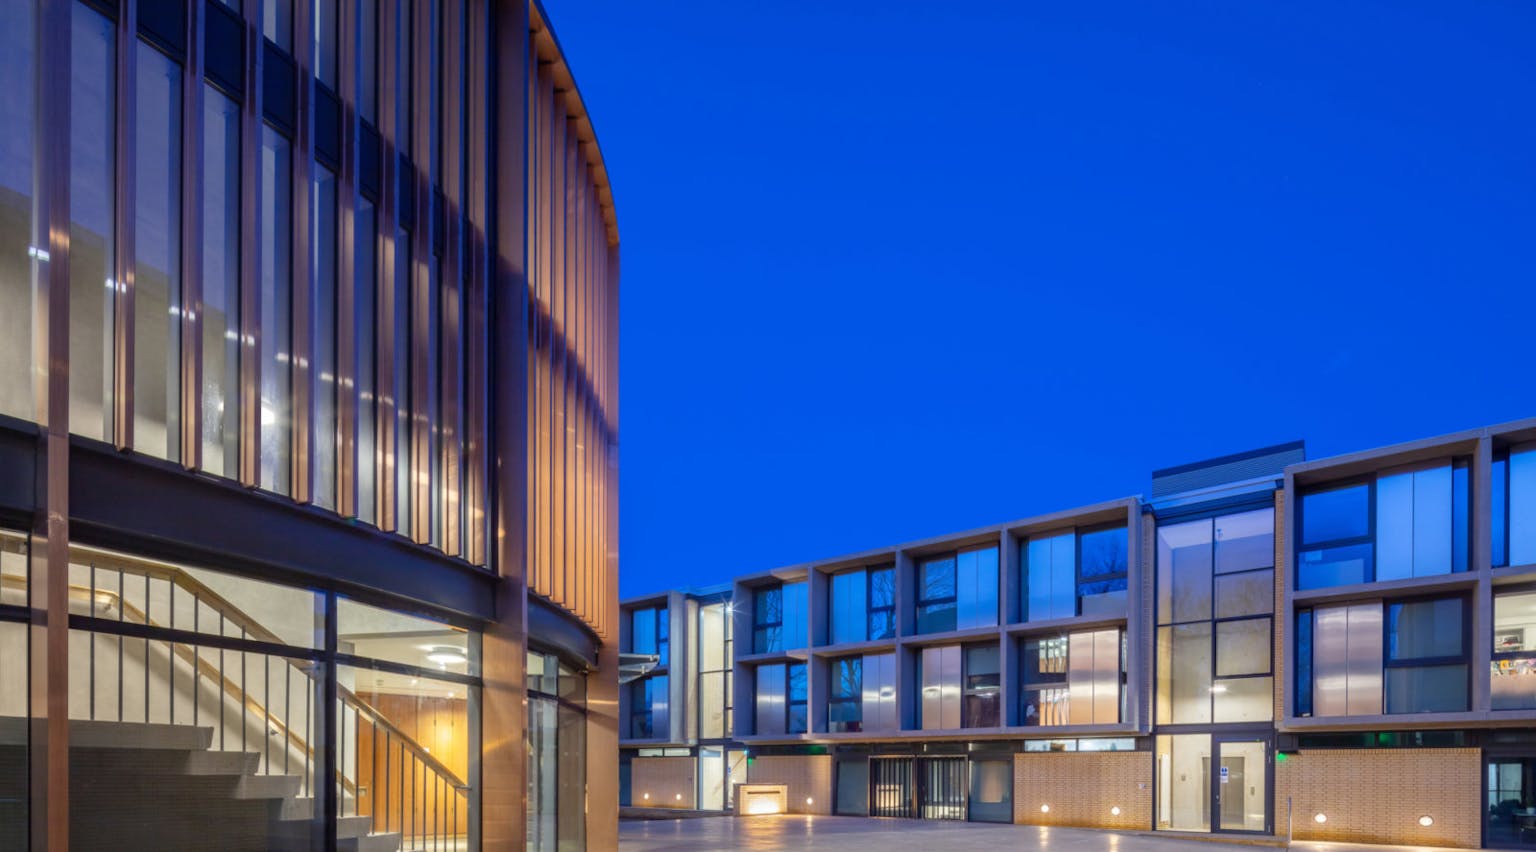 Purcell’s new graduate centre (left) at St Catherine’s College, Oxford, is a bold addition to the site